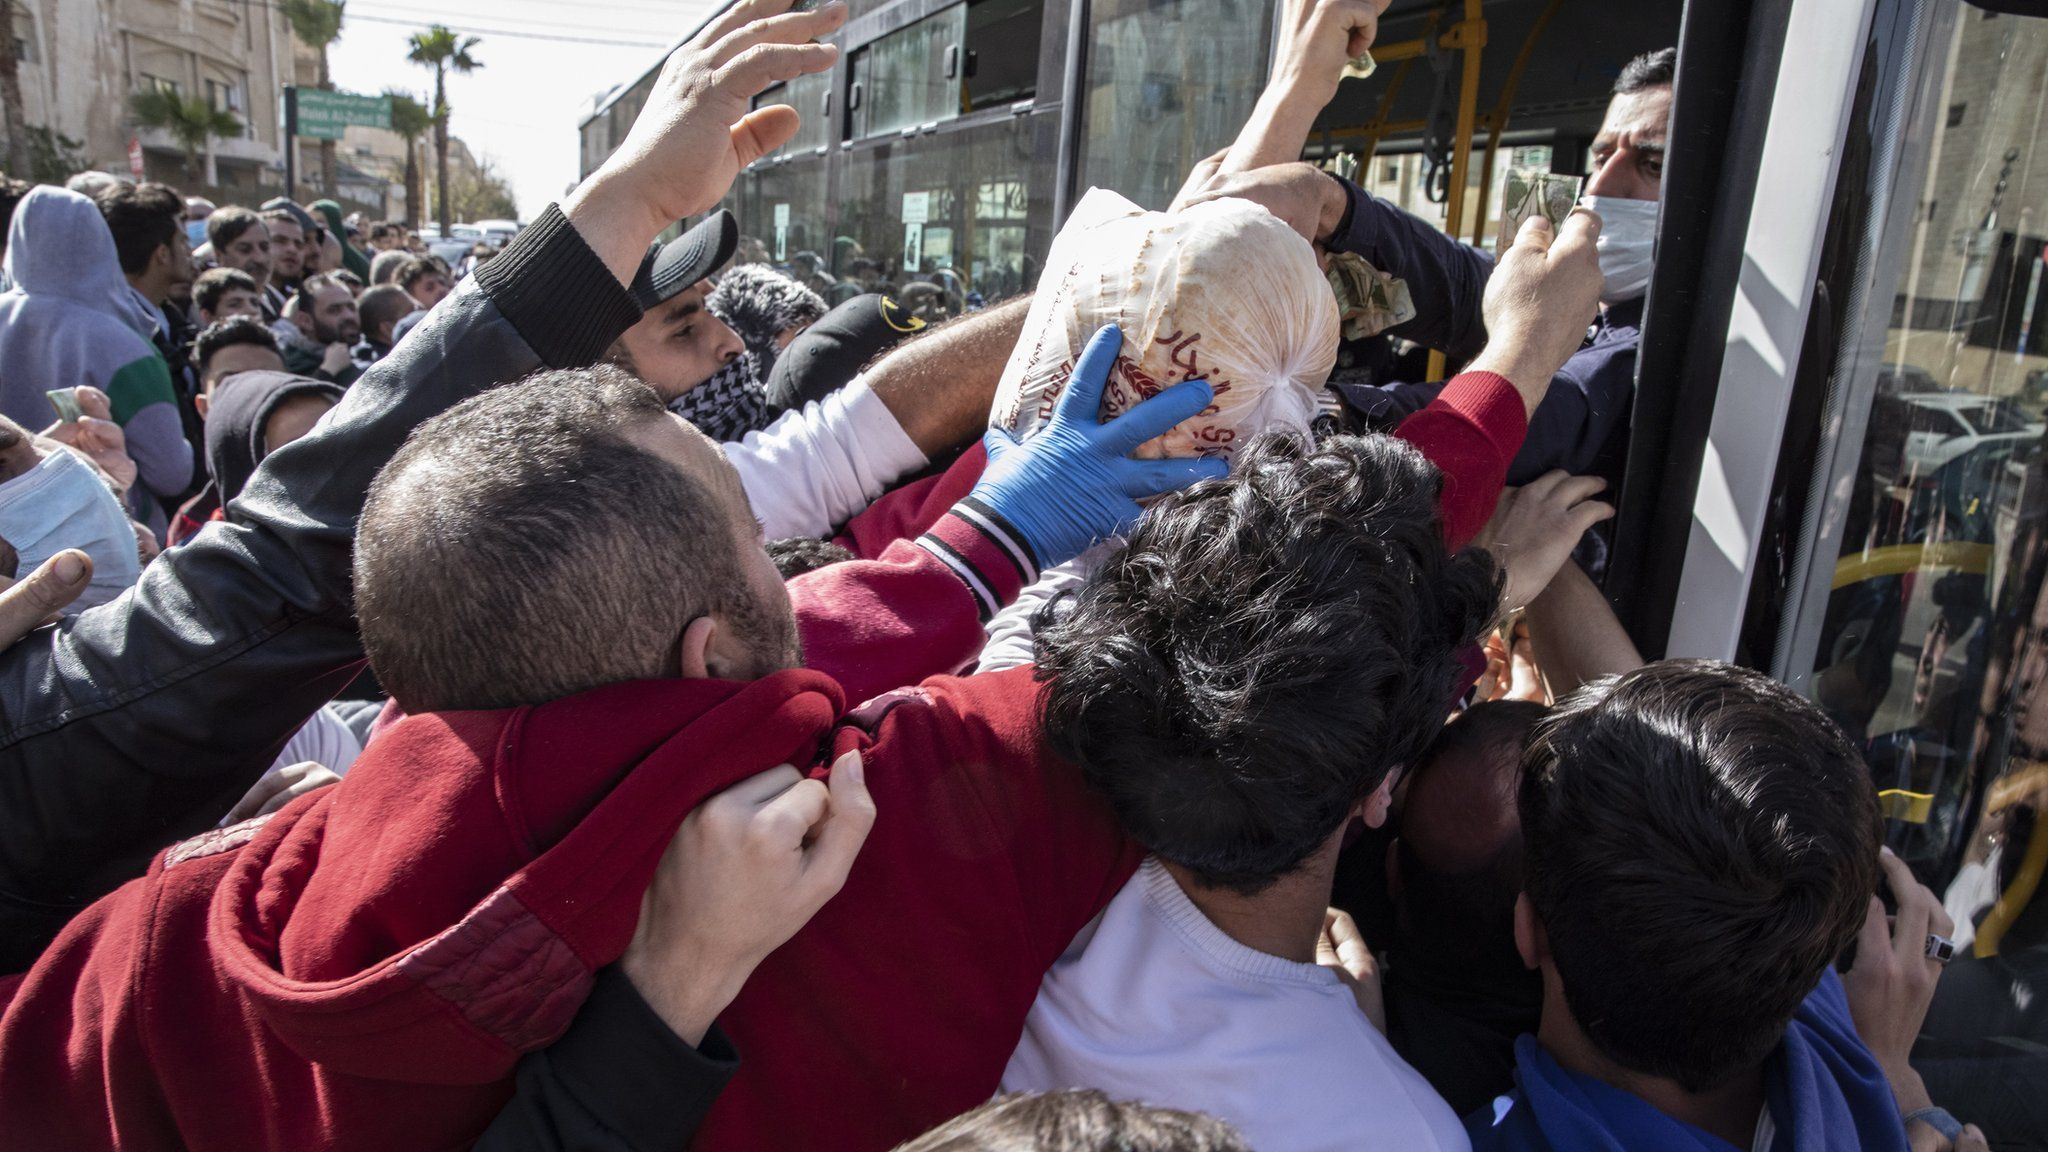 People try to collect bread from municipal buses in Amman, Jordan (24 March 2020)